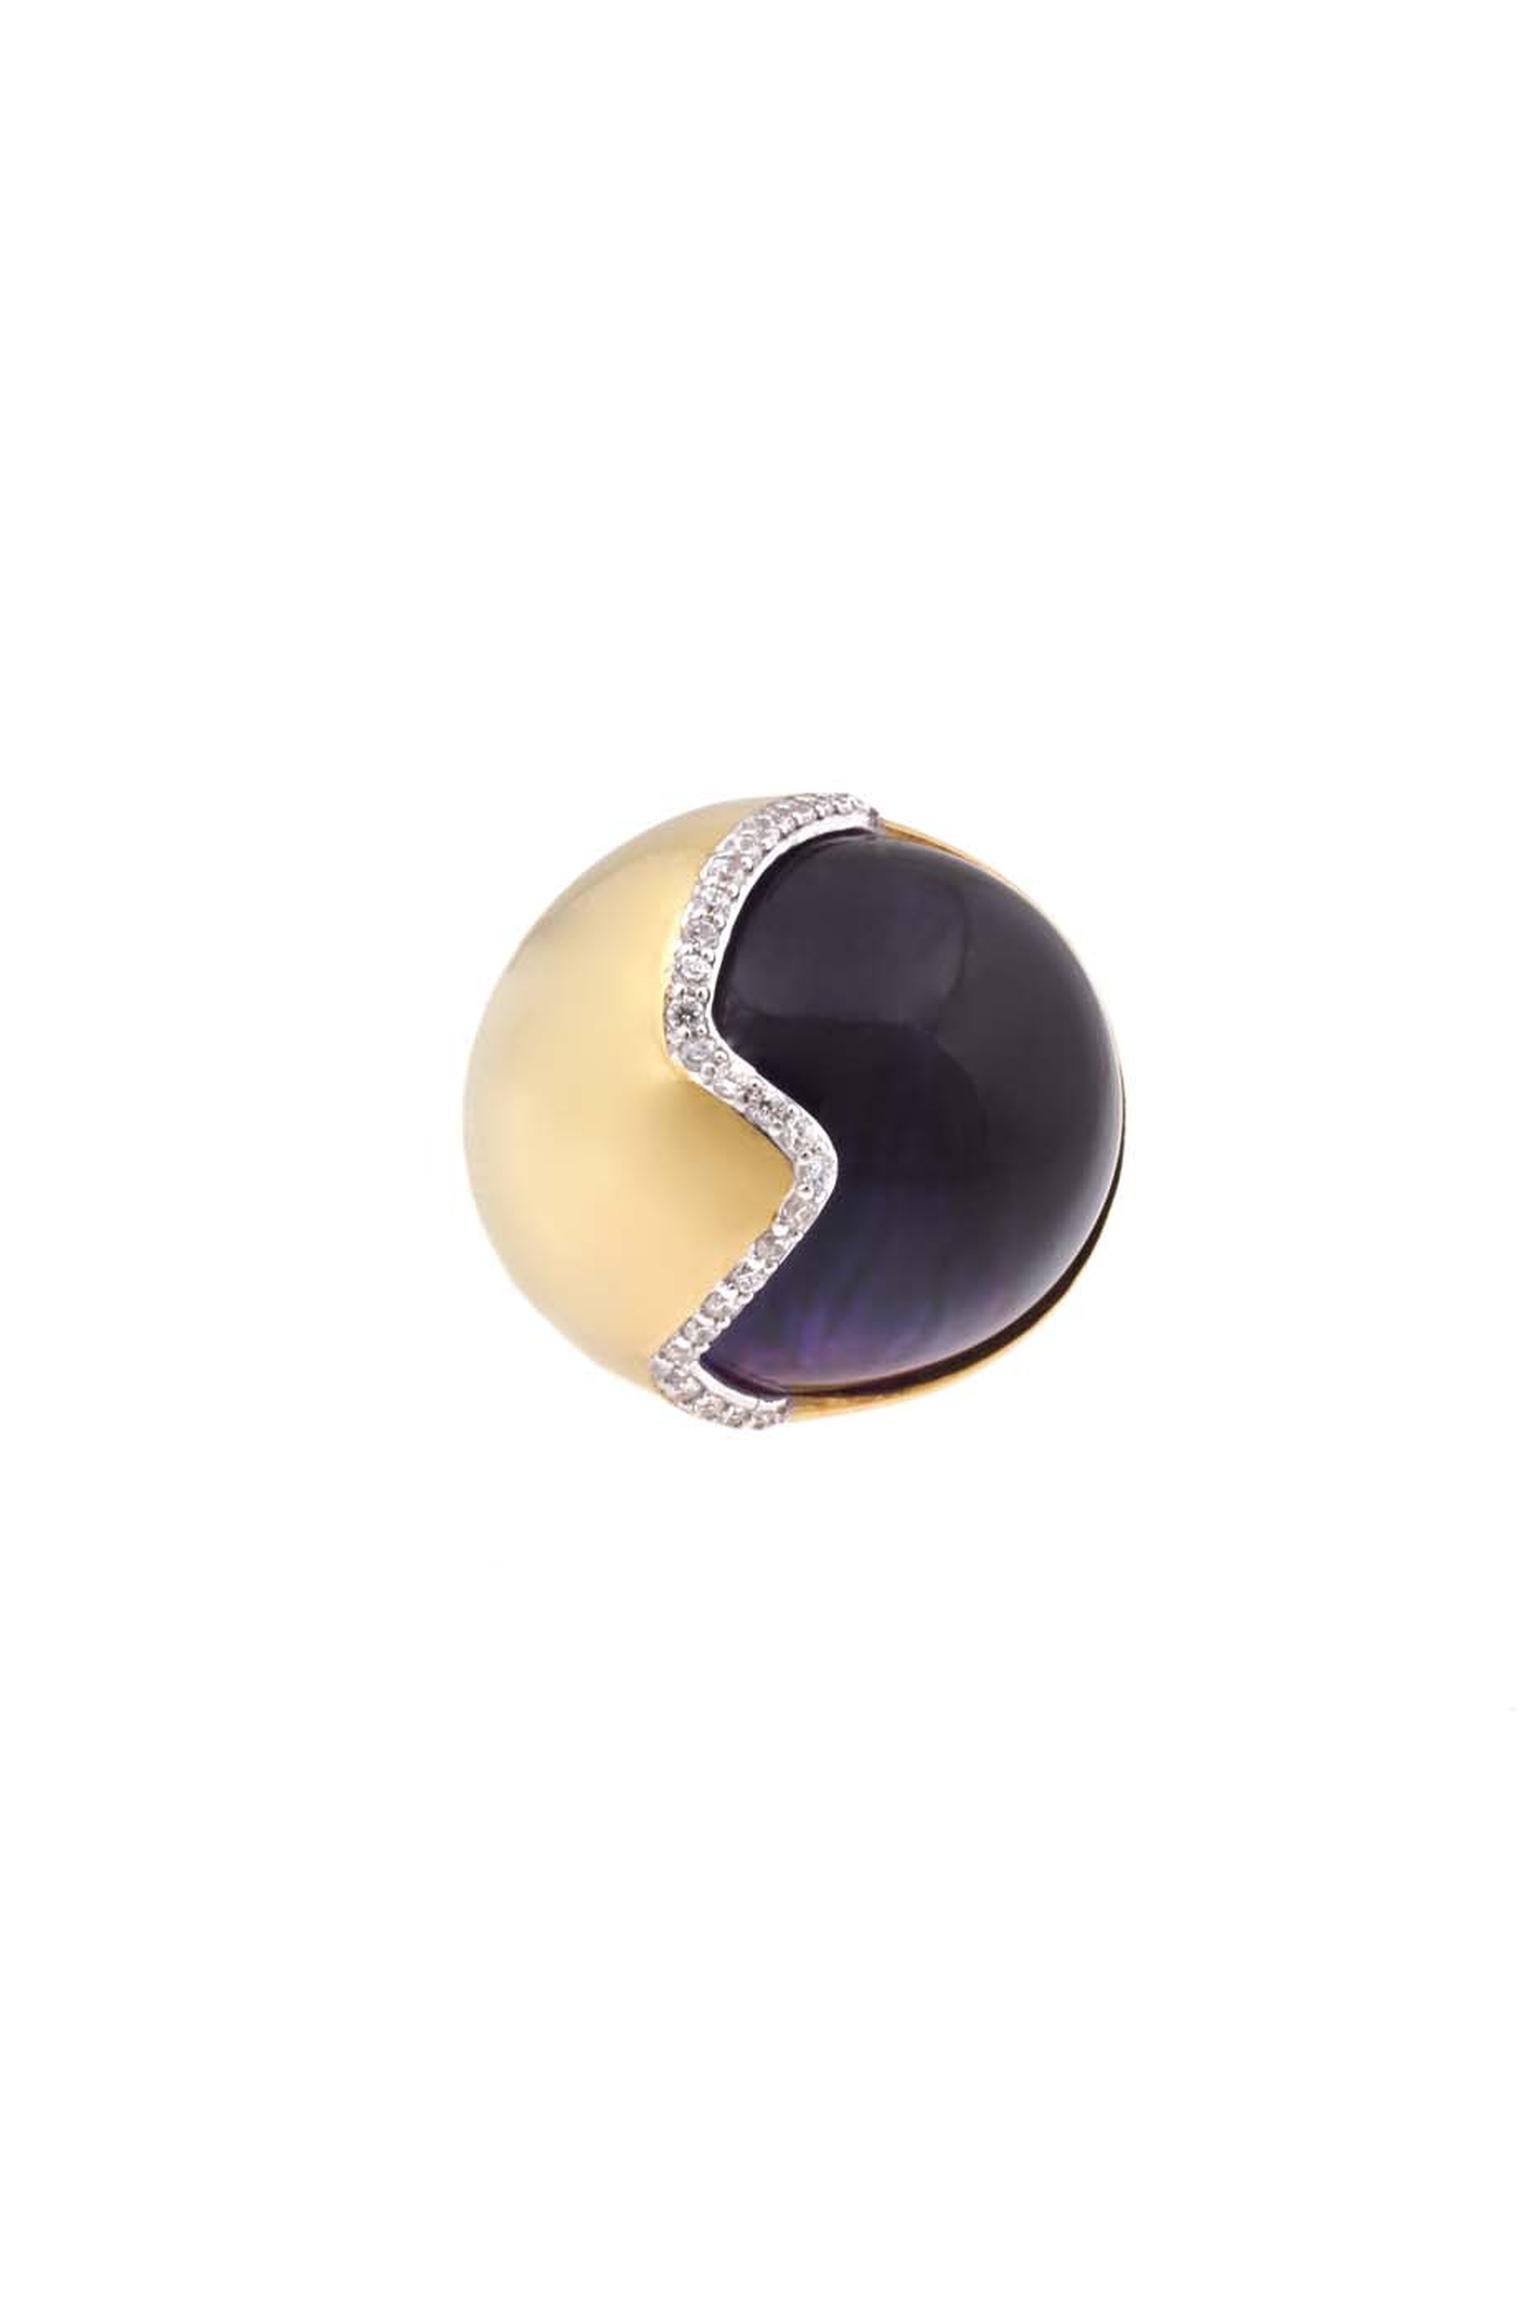 Kara Ross gold Petra smooth contour ring with amethyst and diamonds